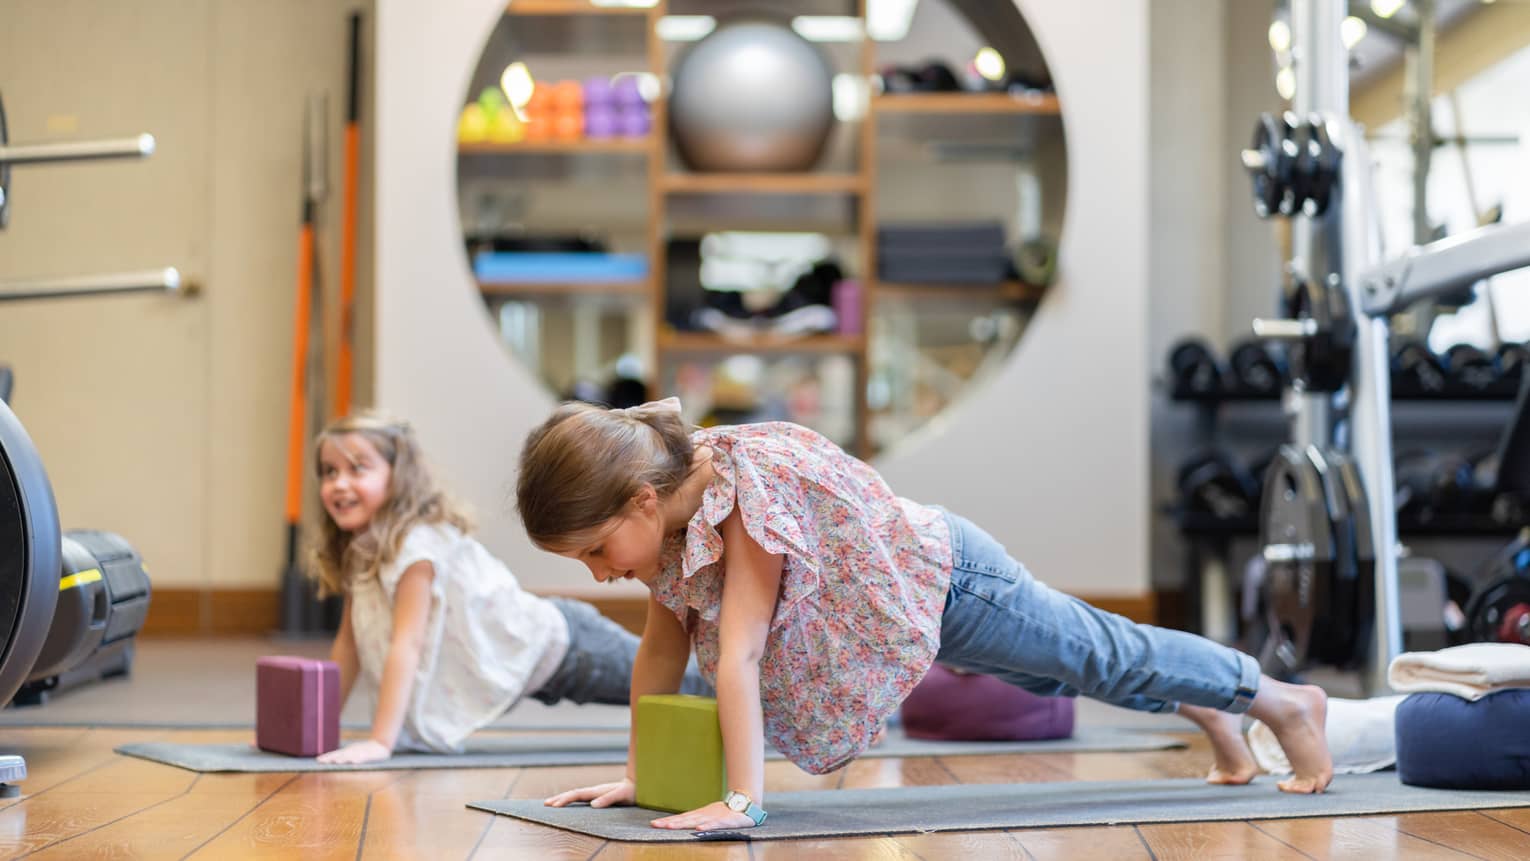 Two girls in downward dog yoga pose over yoga blocks and mats